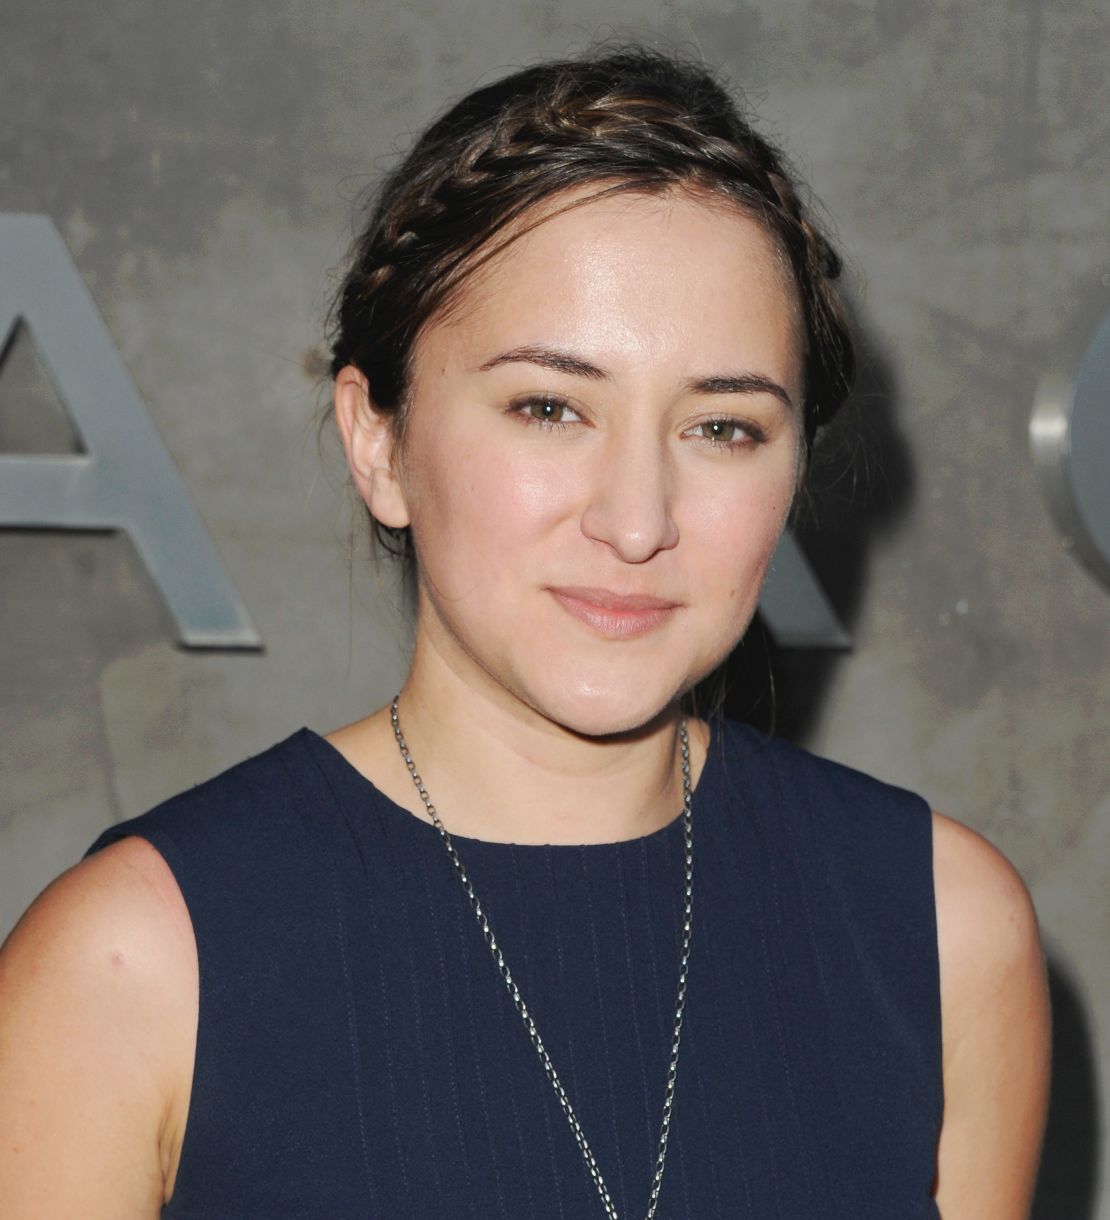 Actress Zelda Williams, the daughter of Robin Williams, closed her social media accounts after abuse after her father's death.